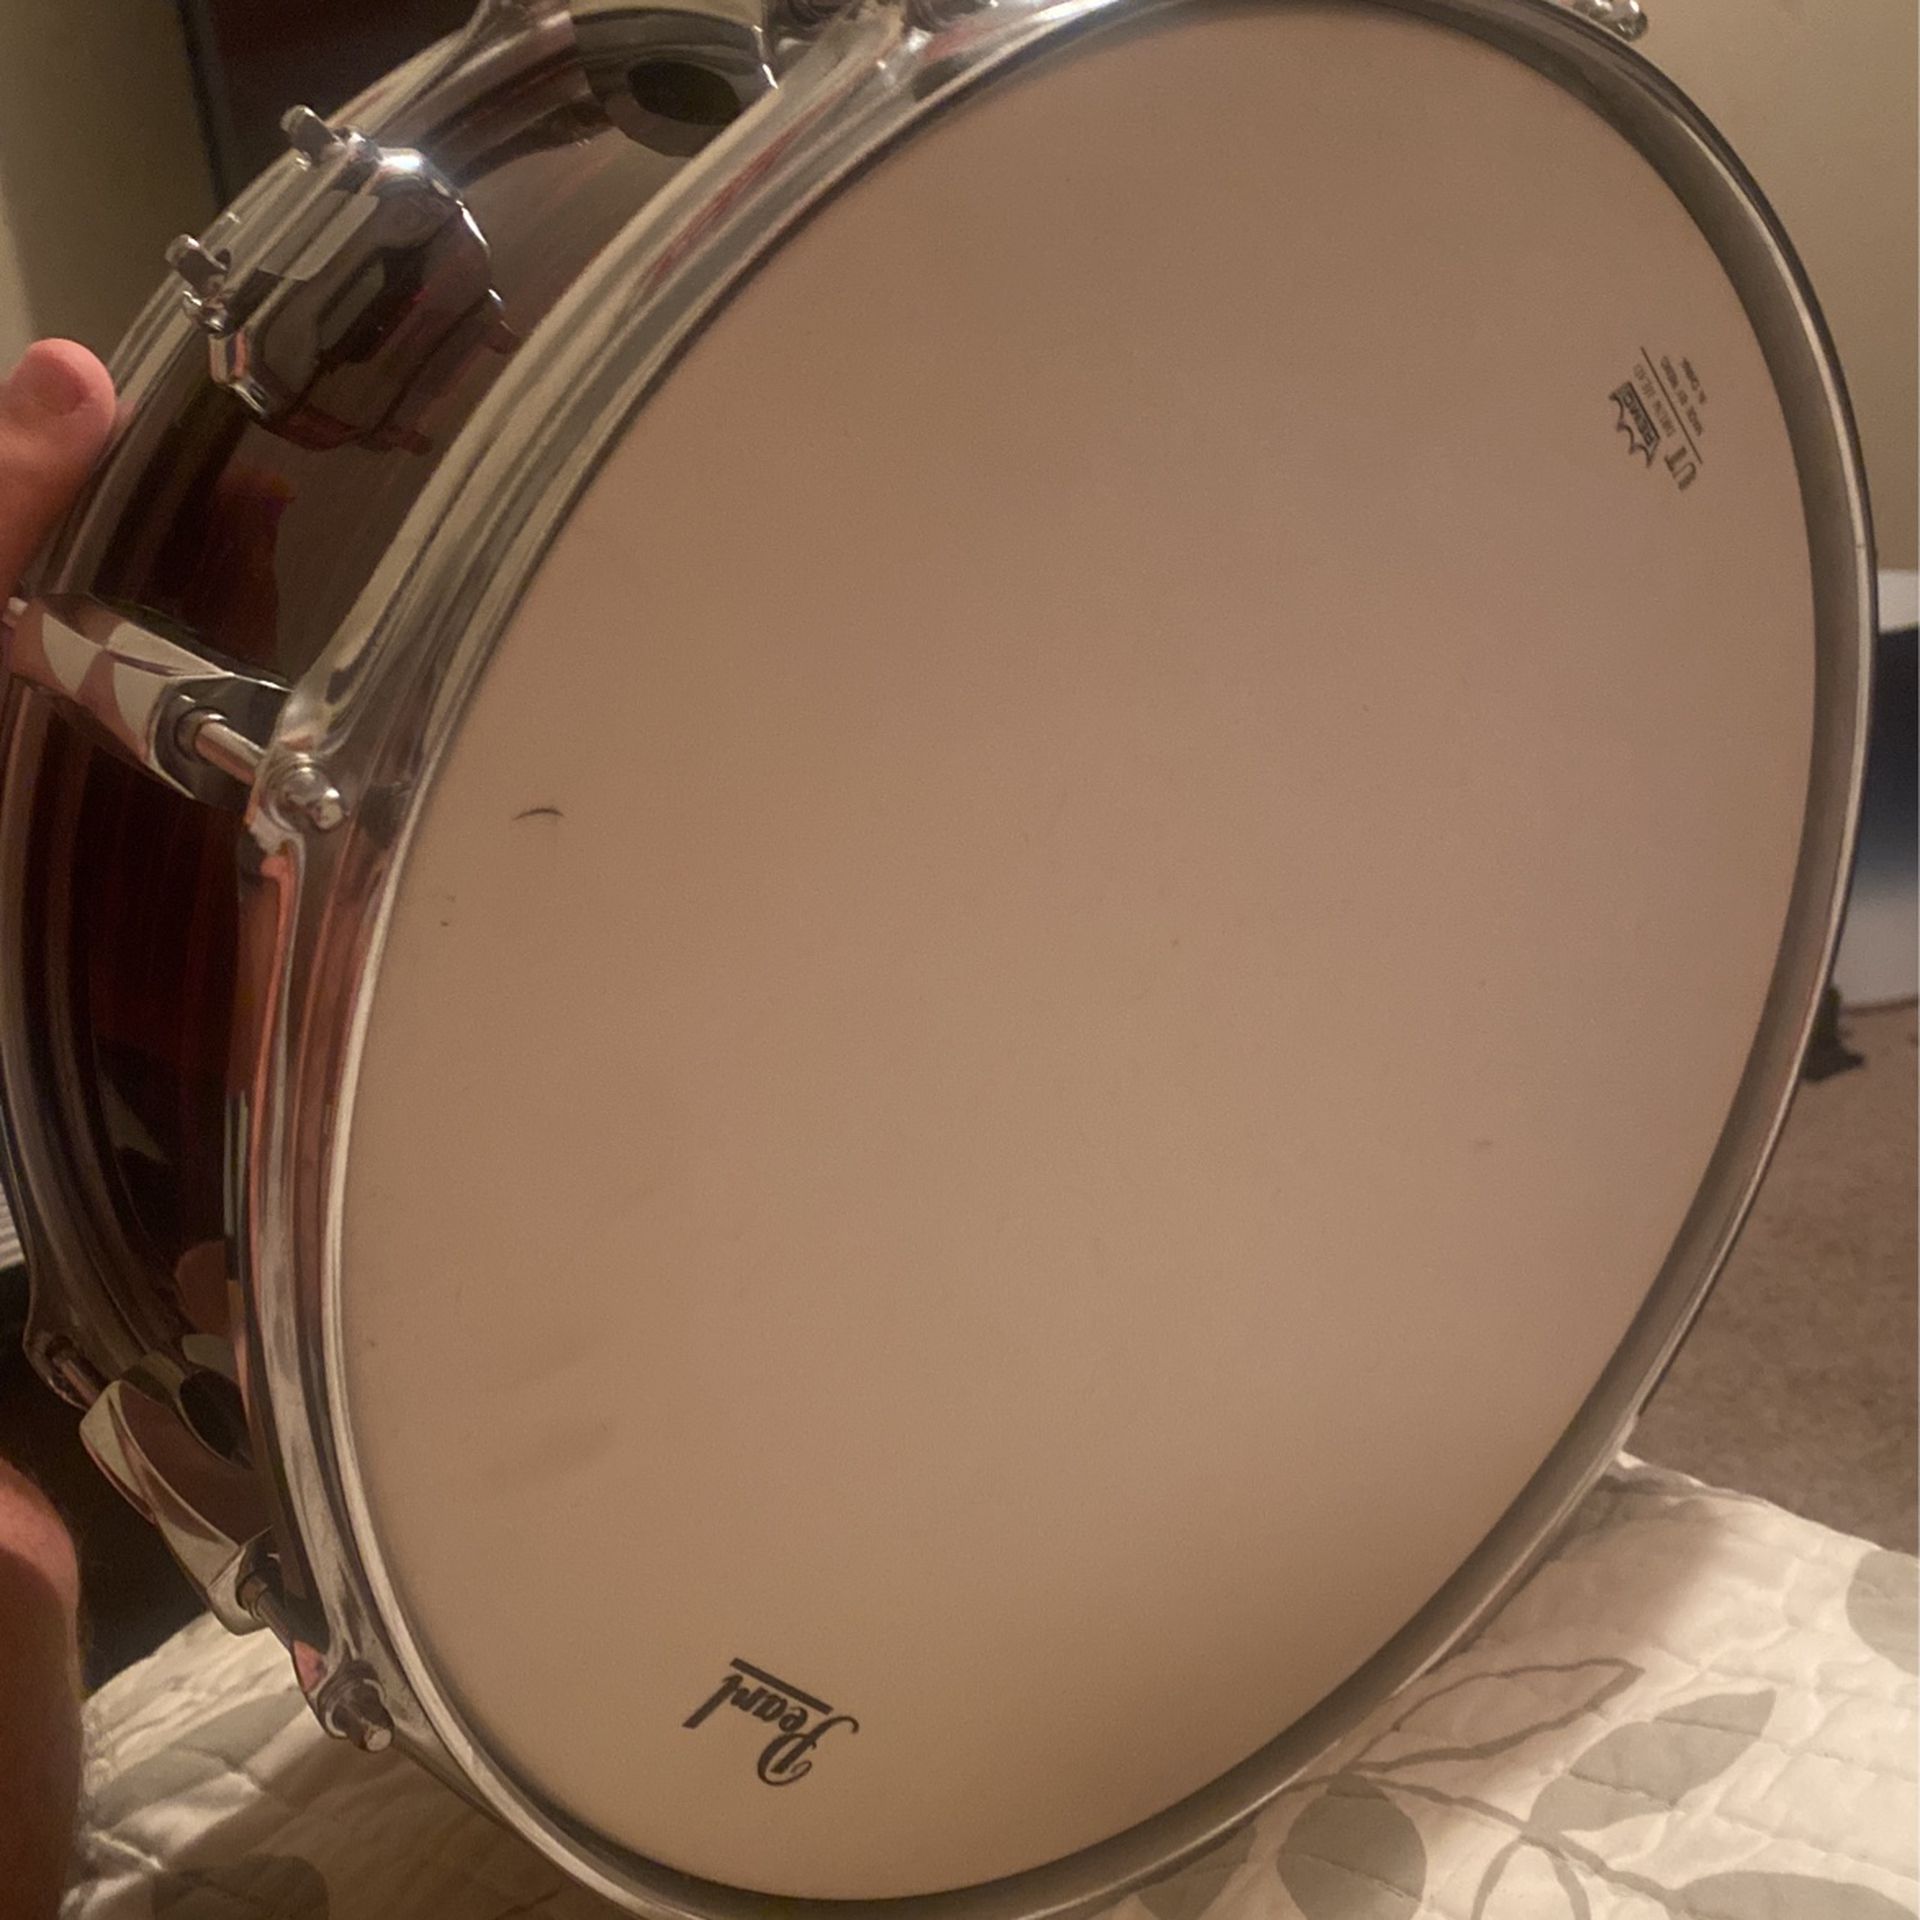 Limited Edition Pearl Snare Drum 